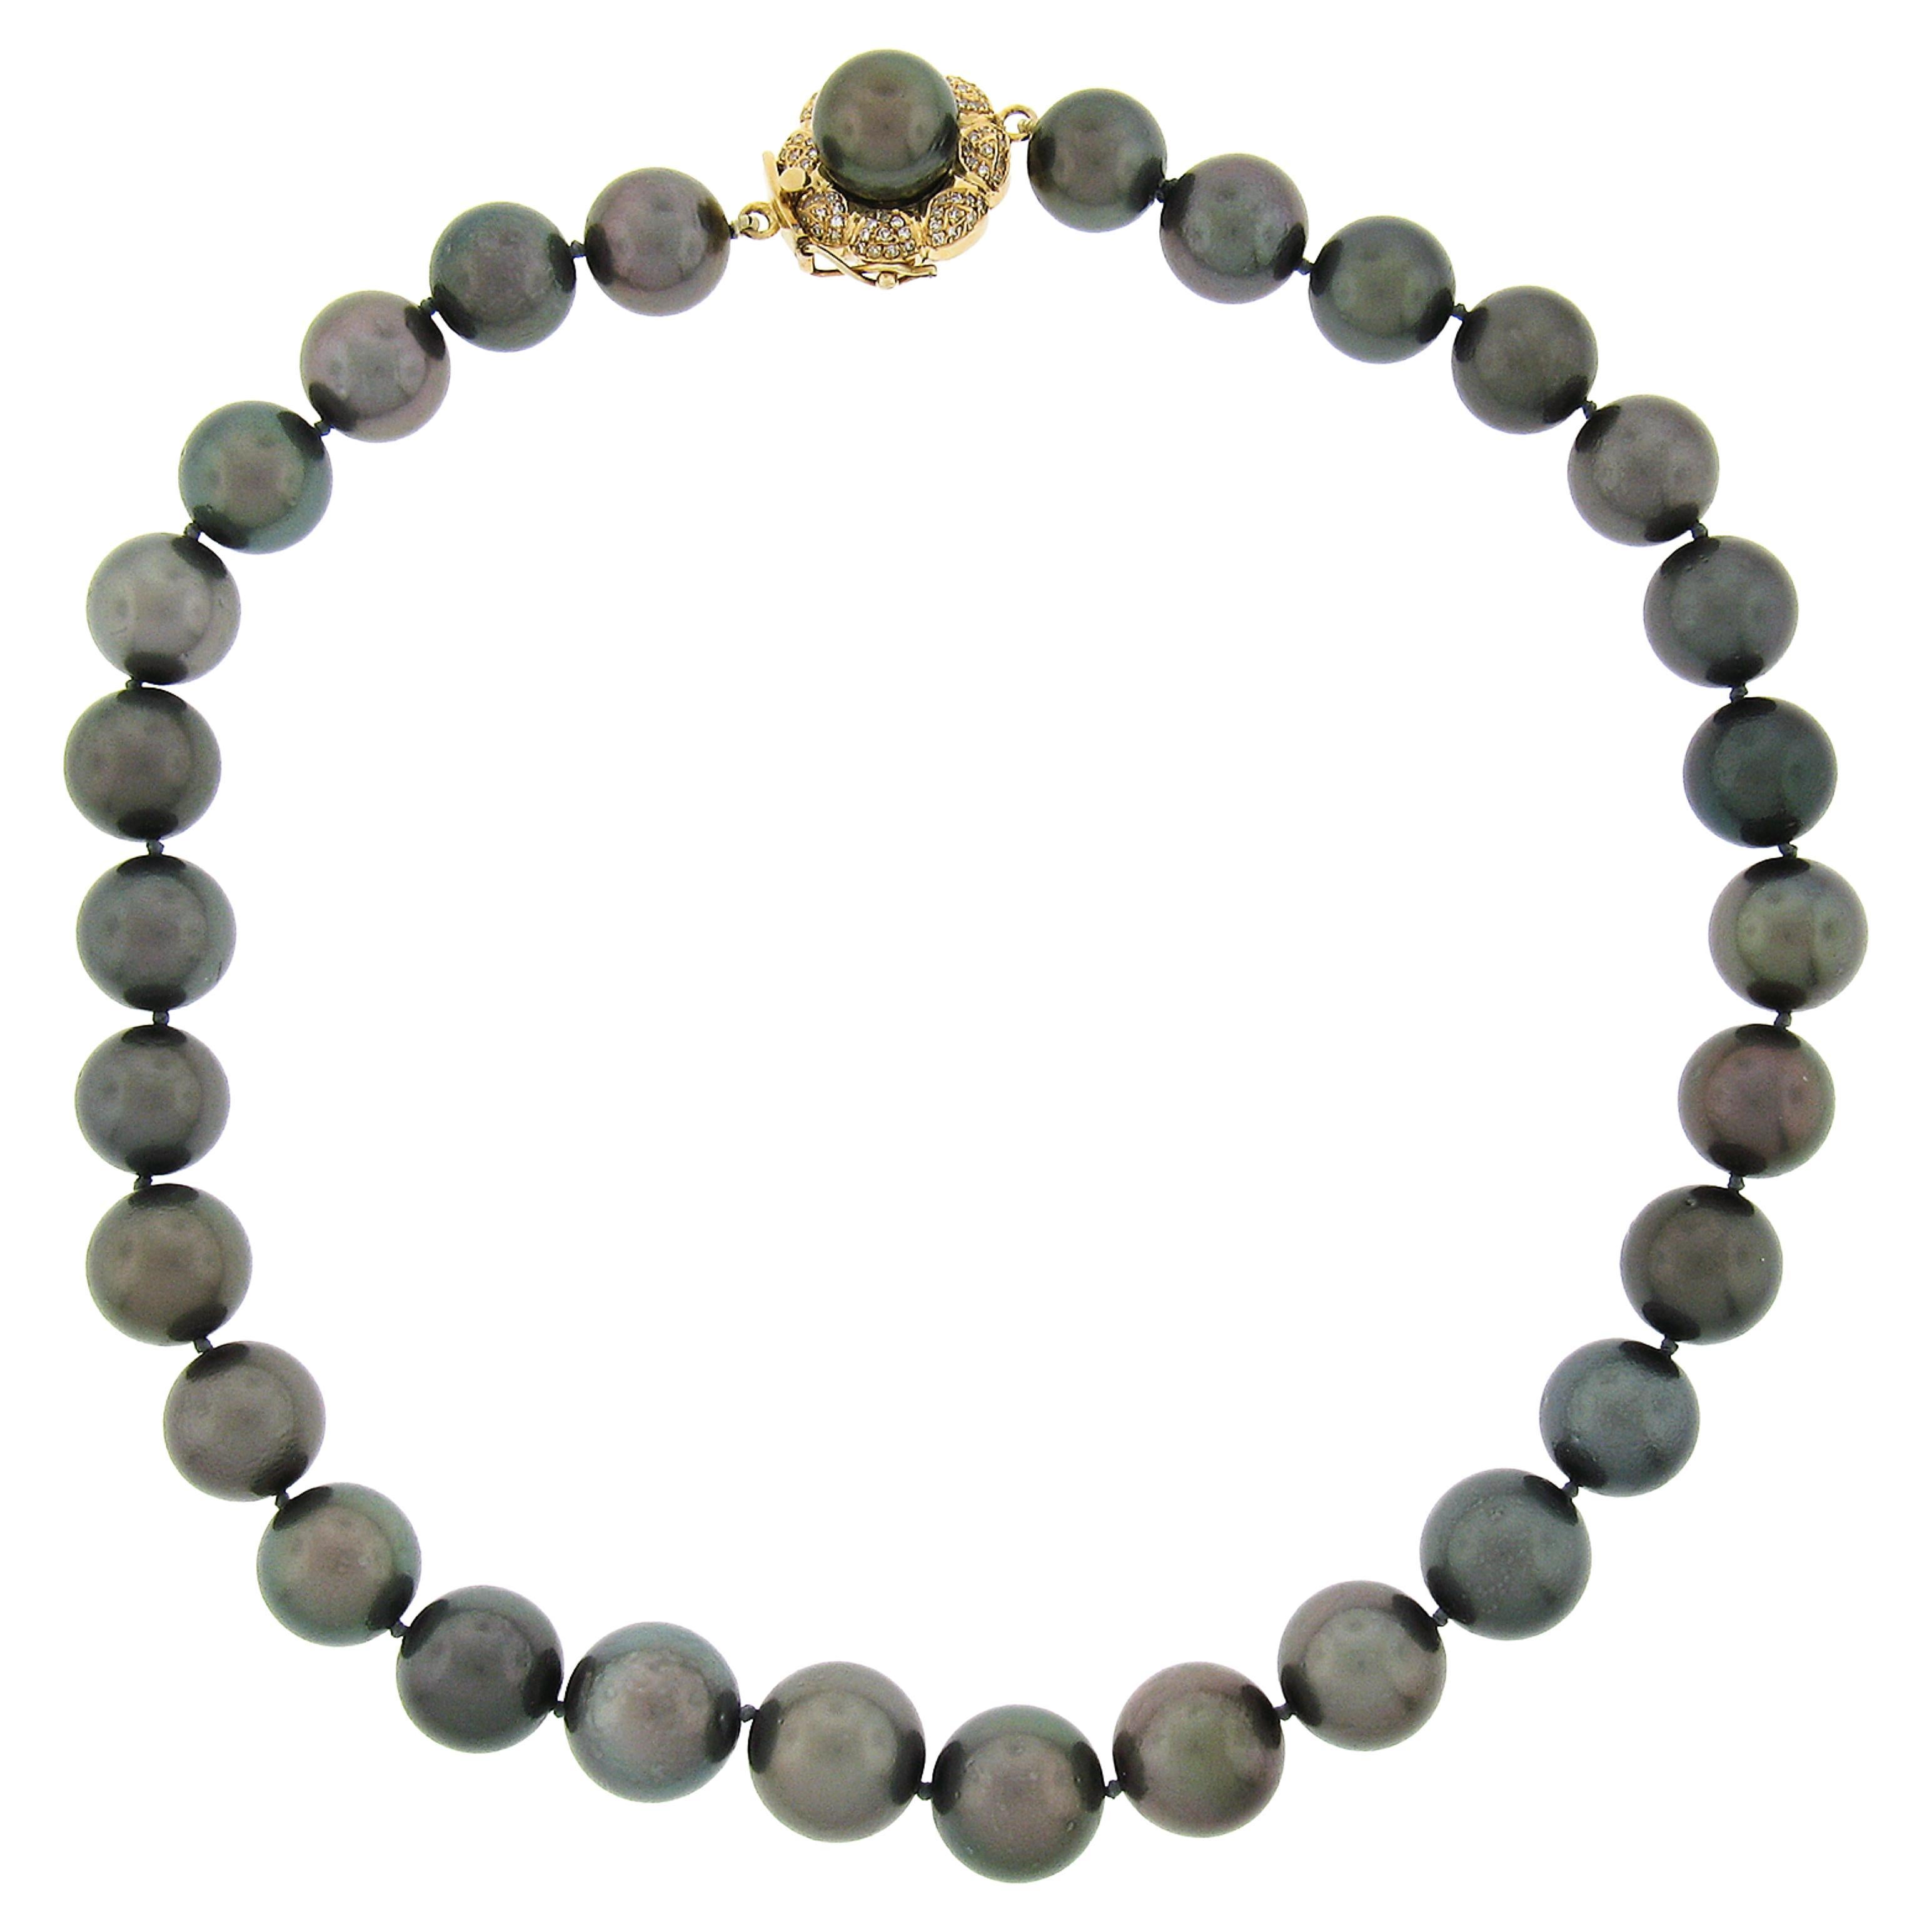 GIA Tahitian Gray Pearl Strand Necklace with 18k Gold Diamond Clasp